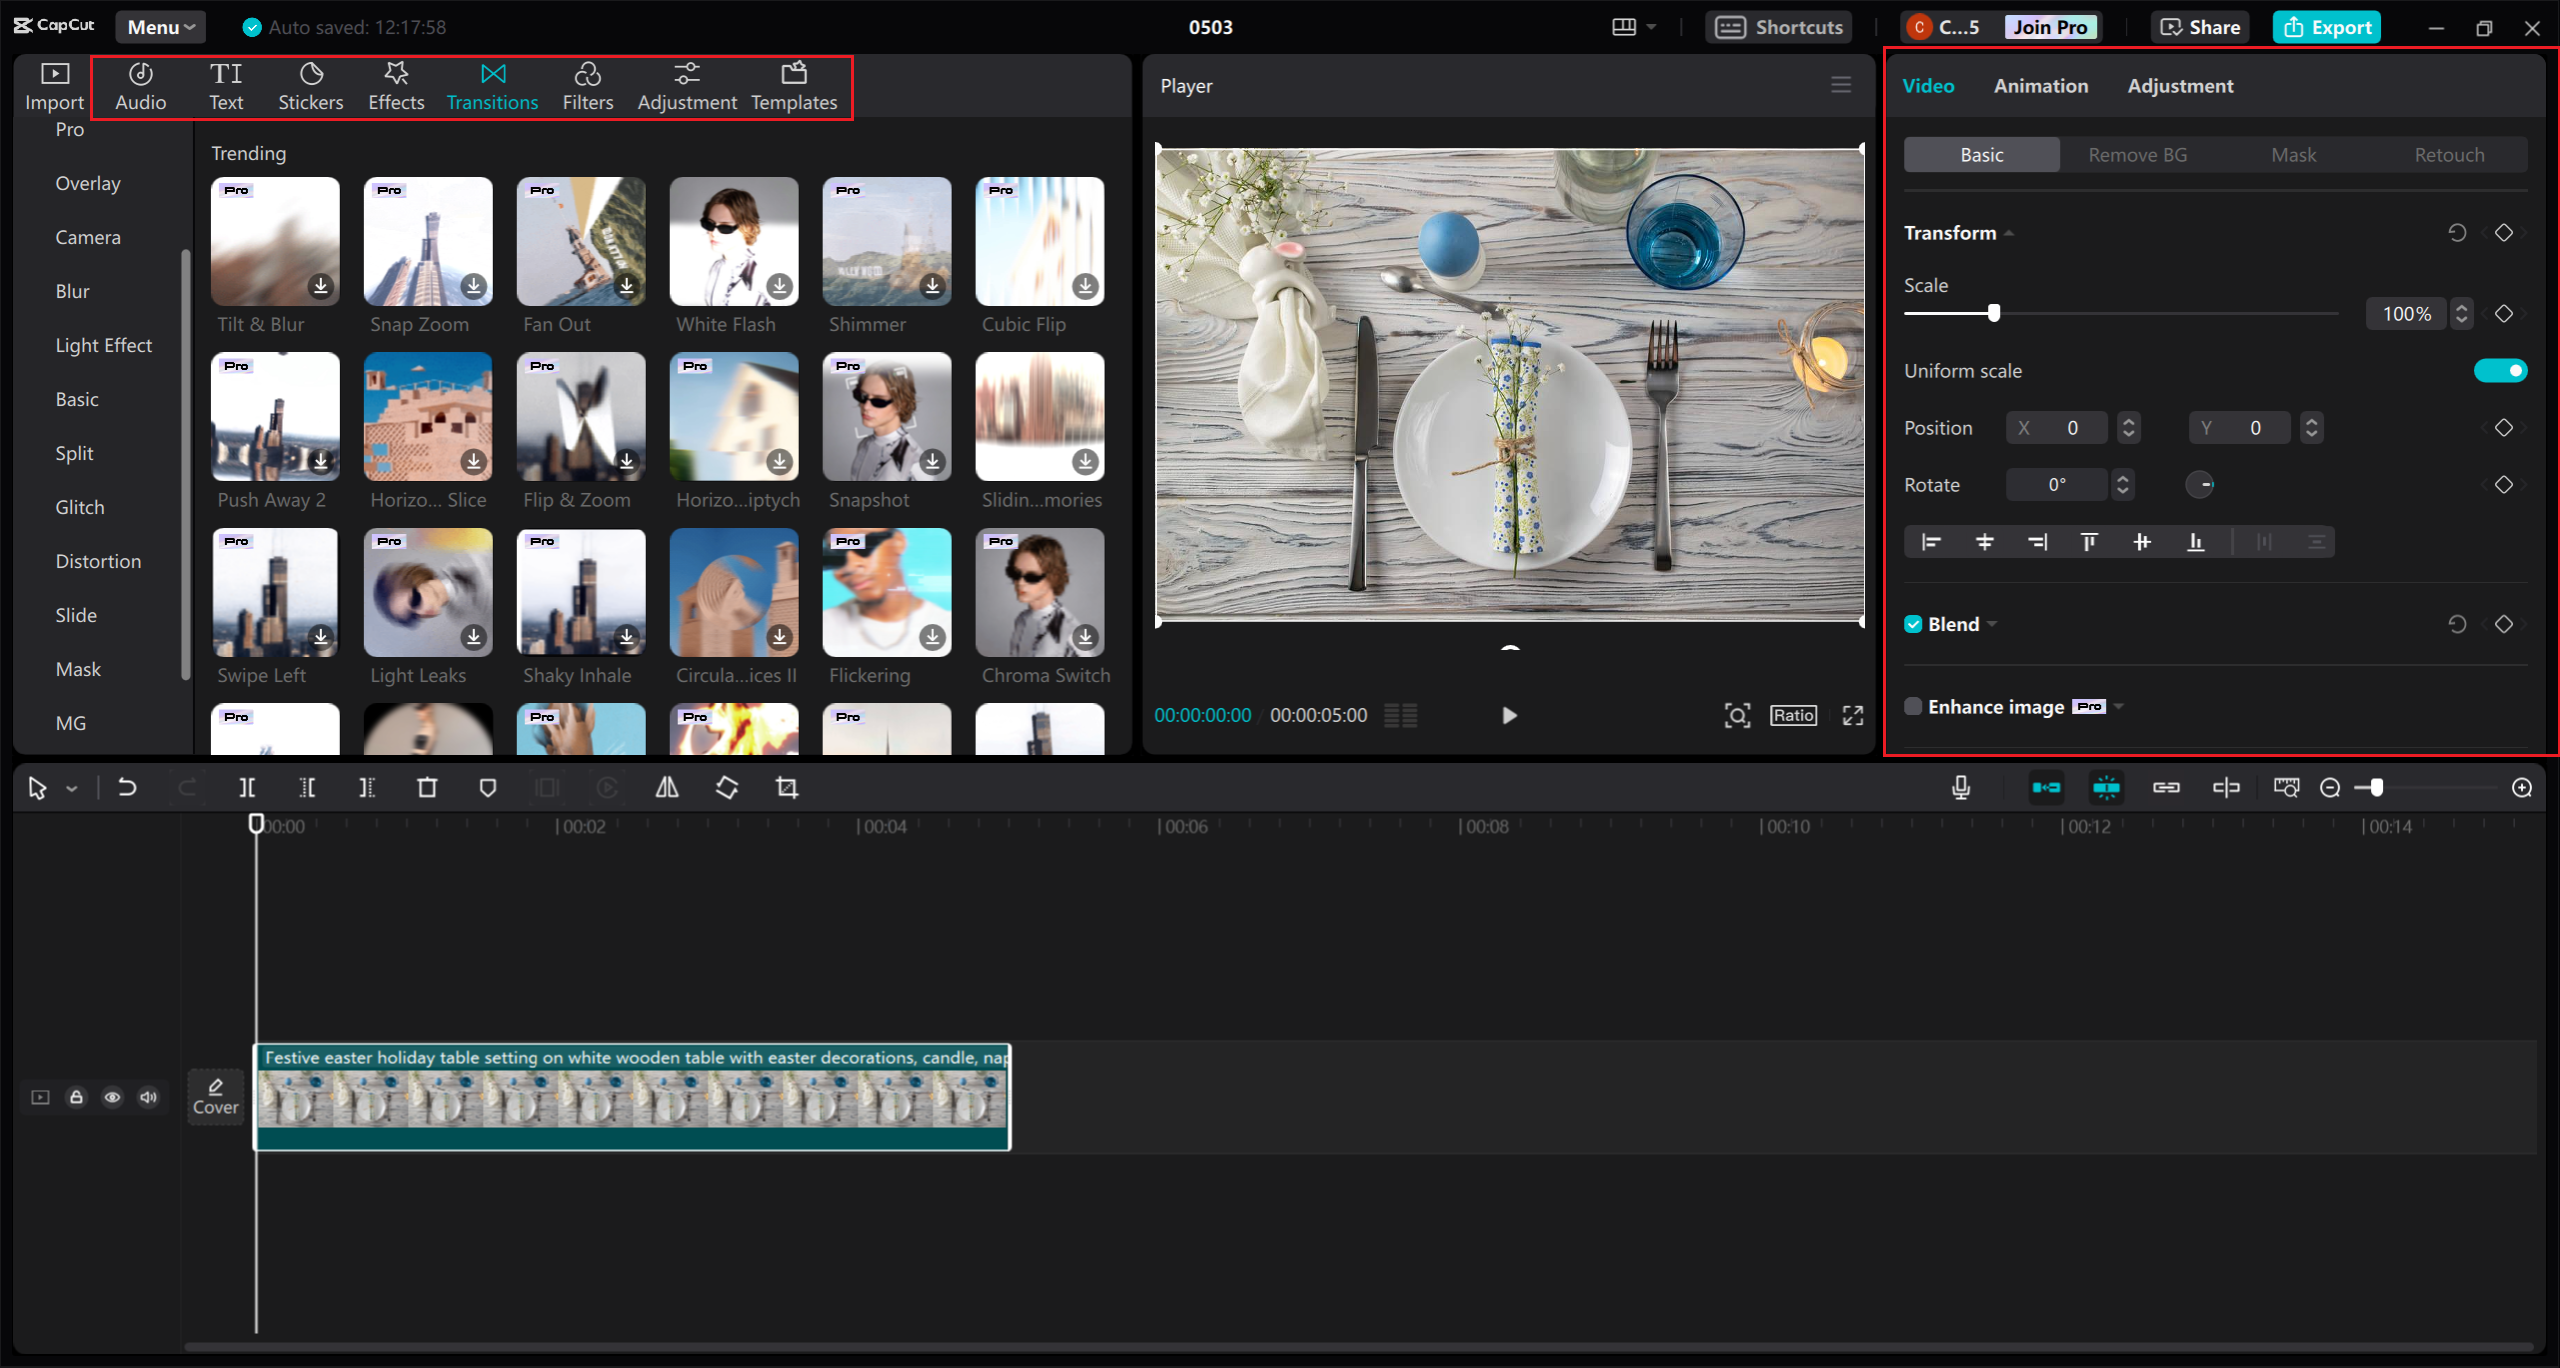 how to edit video on CapCut